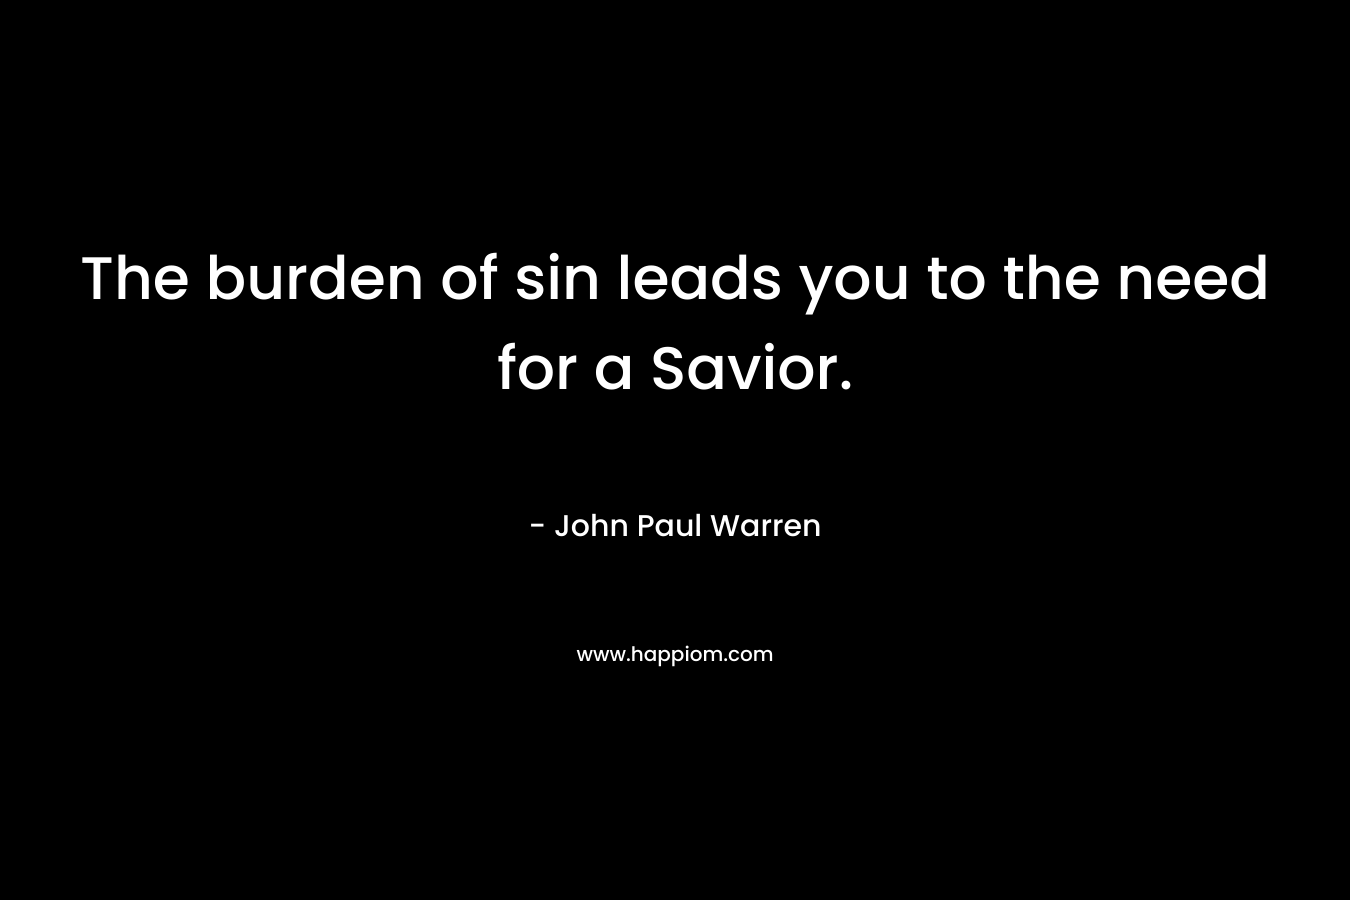 The burden of sin leads you to the need for a Savior. – John Paul Warren